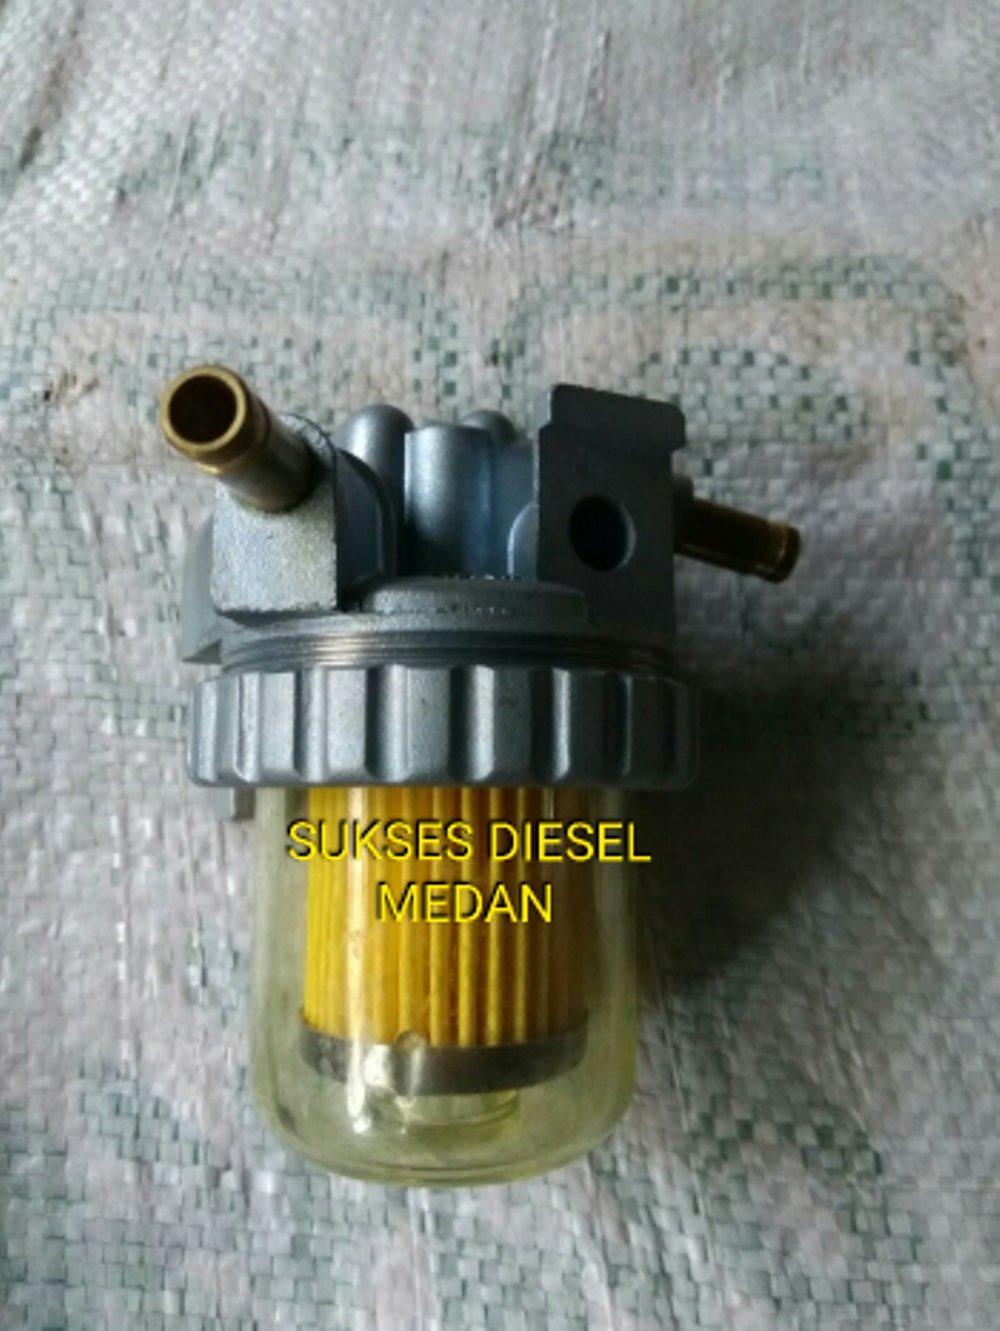 YAMASCO Fuel Strainer Assy Filter 704300-55500 fit Yanmar TS50 TS60 Water Cooled Diesel Engine 